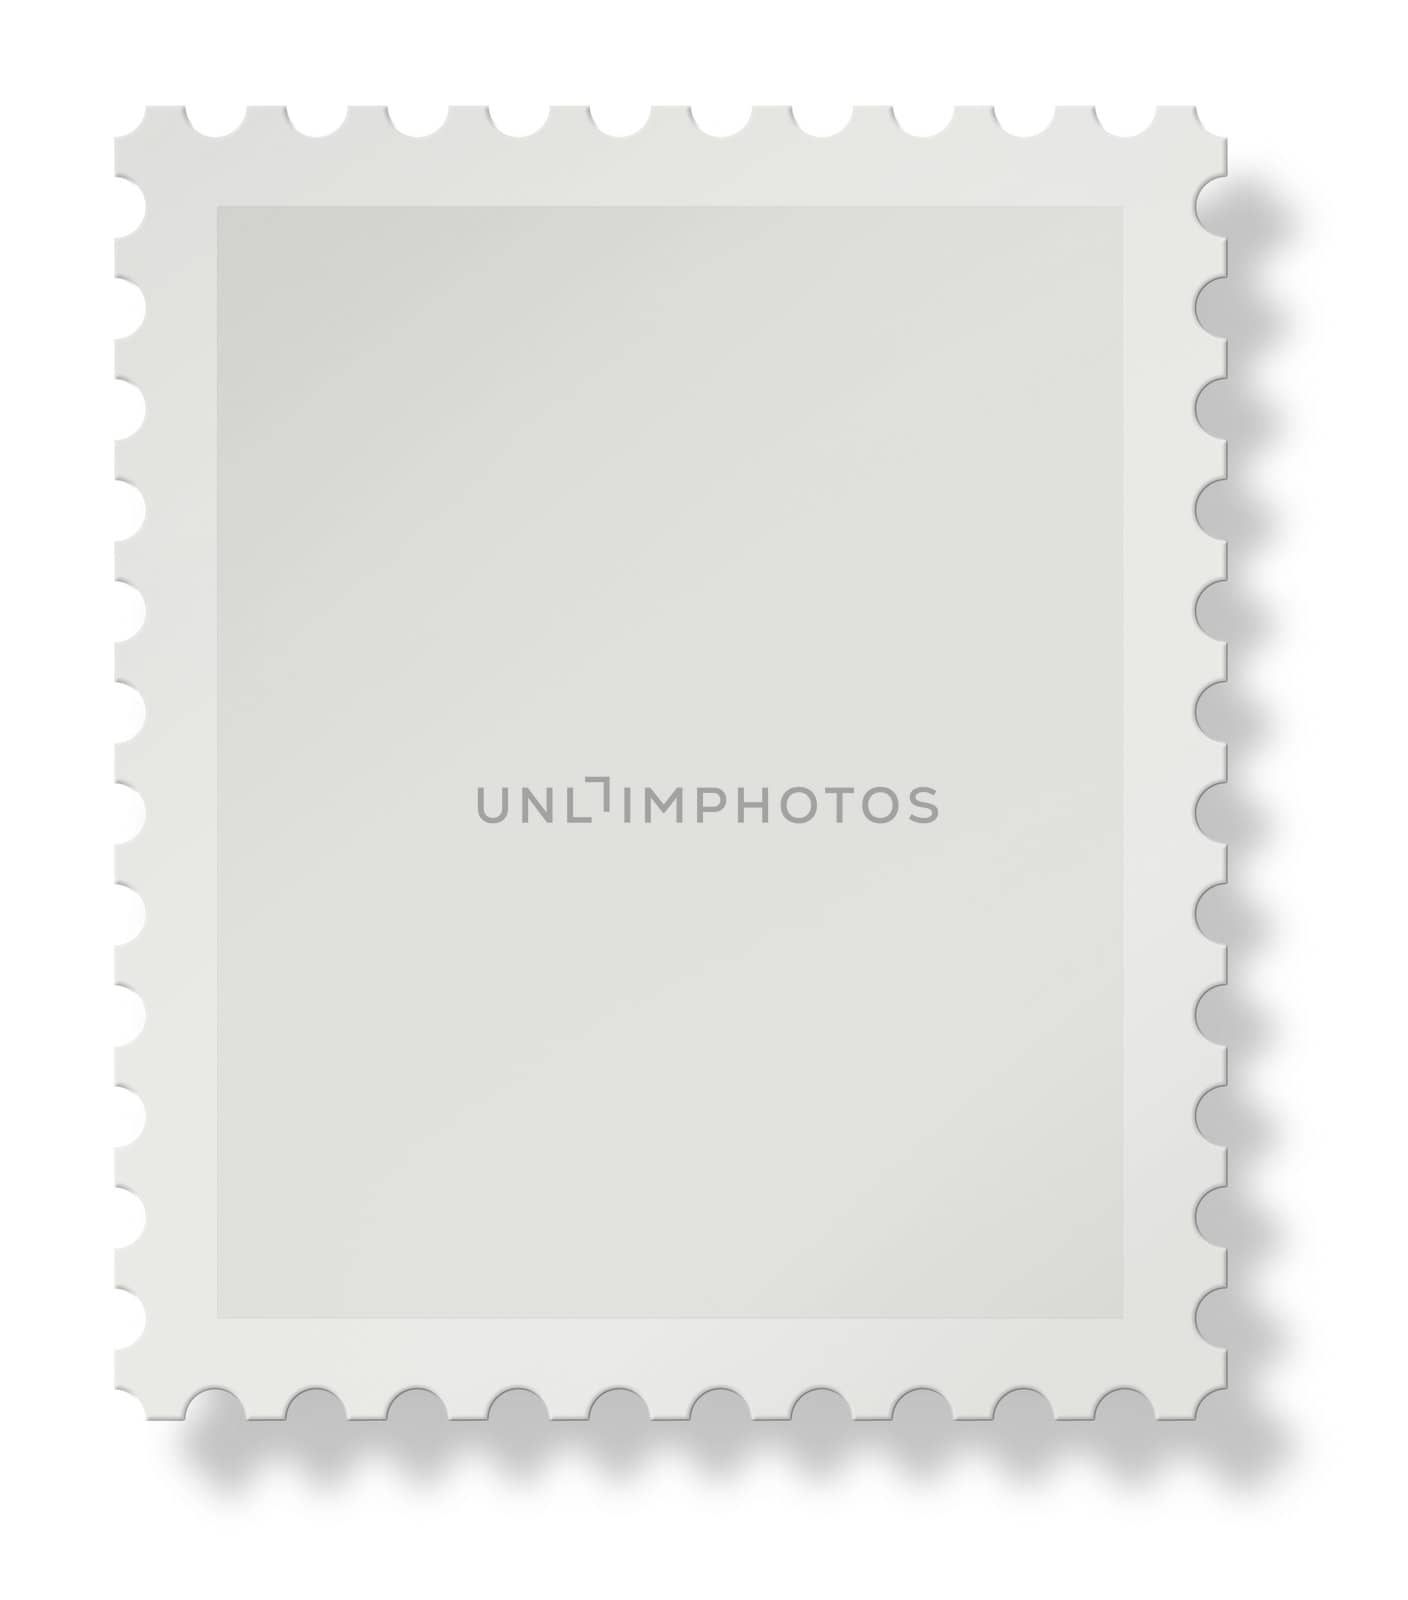 Blank postal stamp with soft shadow on white background, add your own design